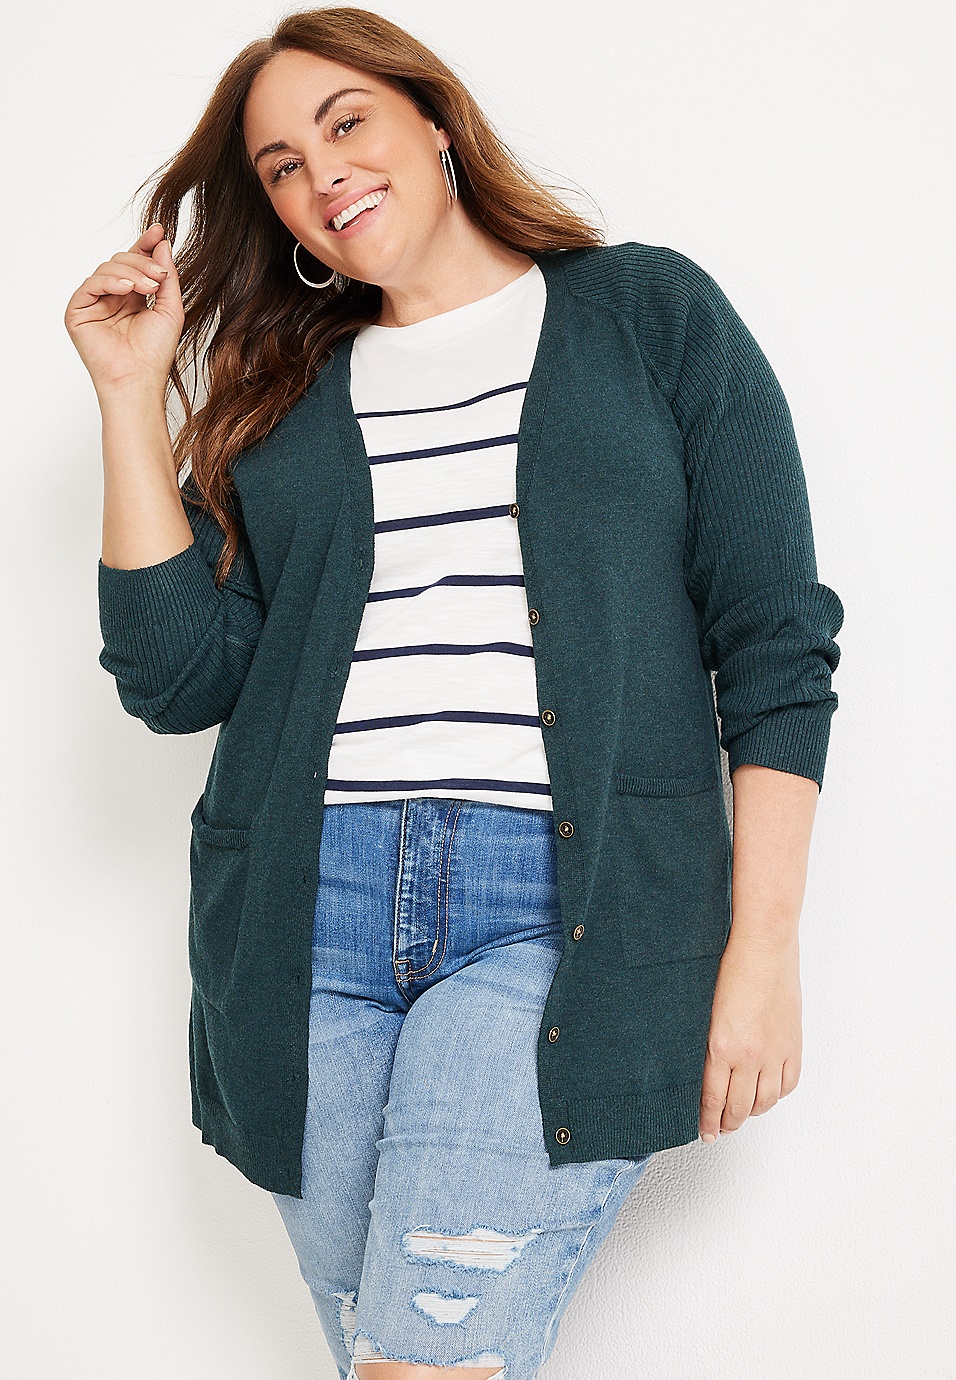 Peck Indskrive Savvy Plus Size Solid Boyfriend Cardigan | maurices